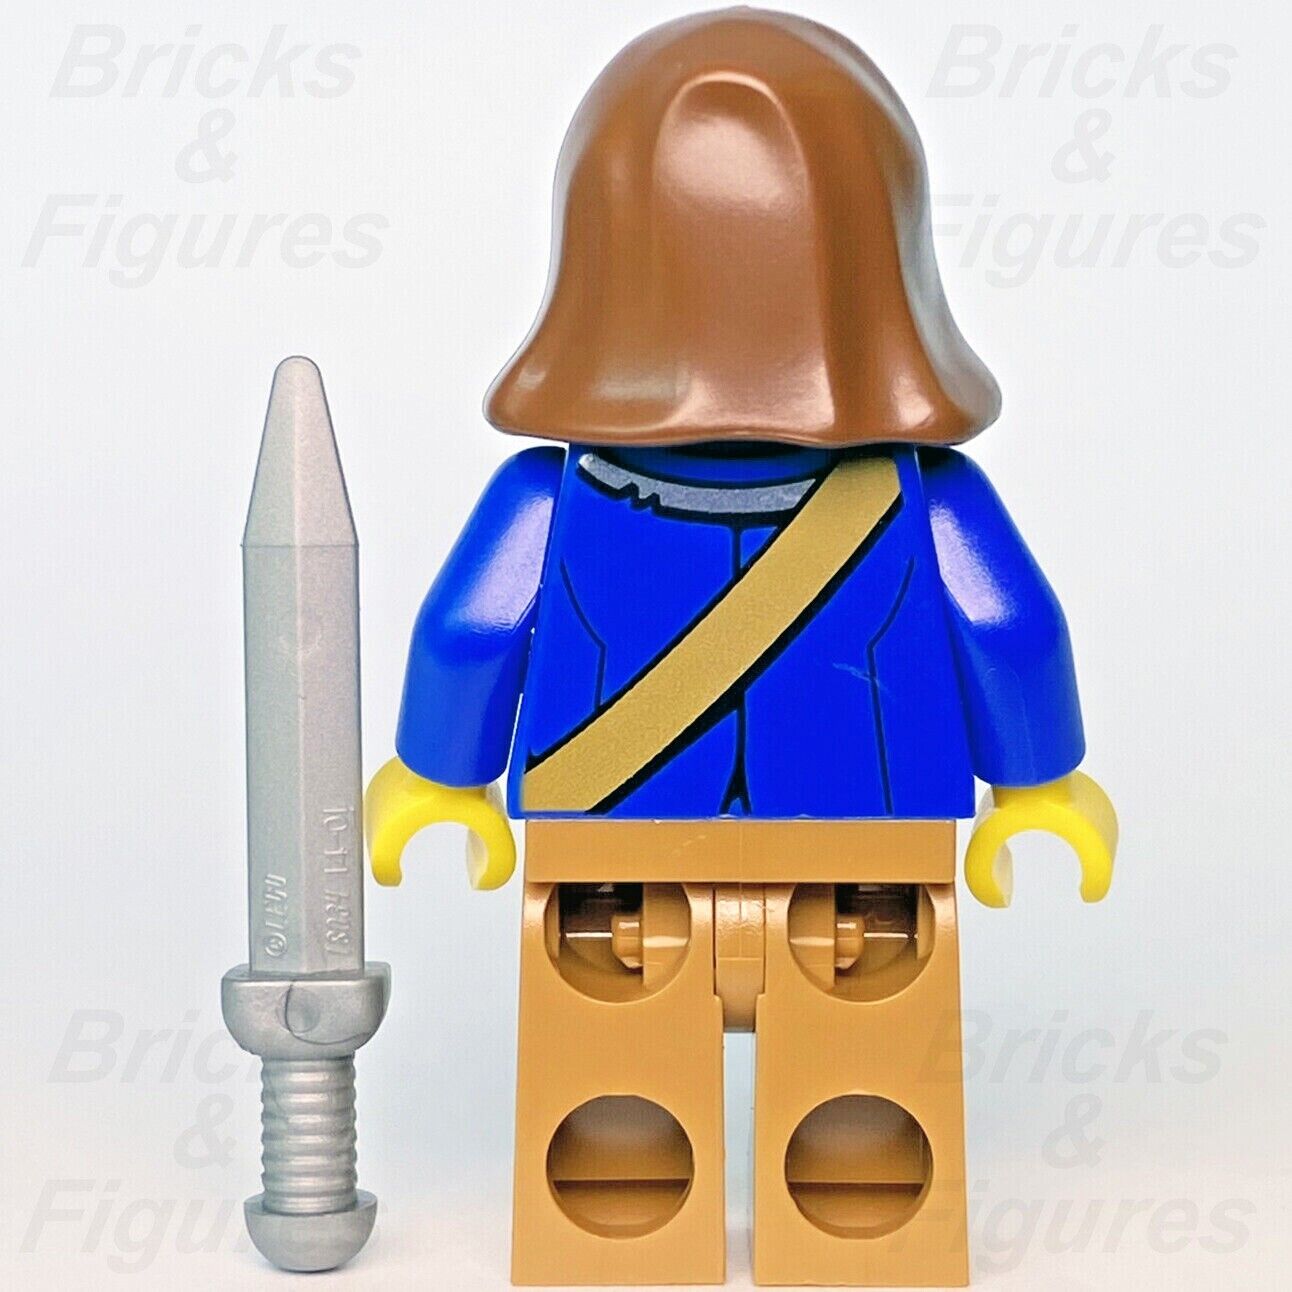 LEGO Smuggler Castle in the Forest Minifigure with Sword 910001 adp016 Genuine - Bricks & Figures